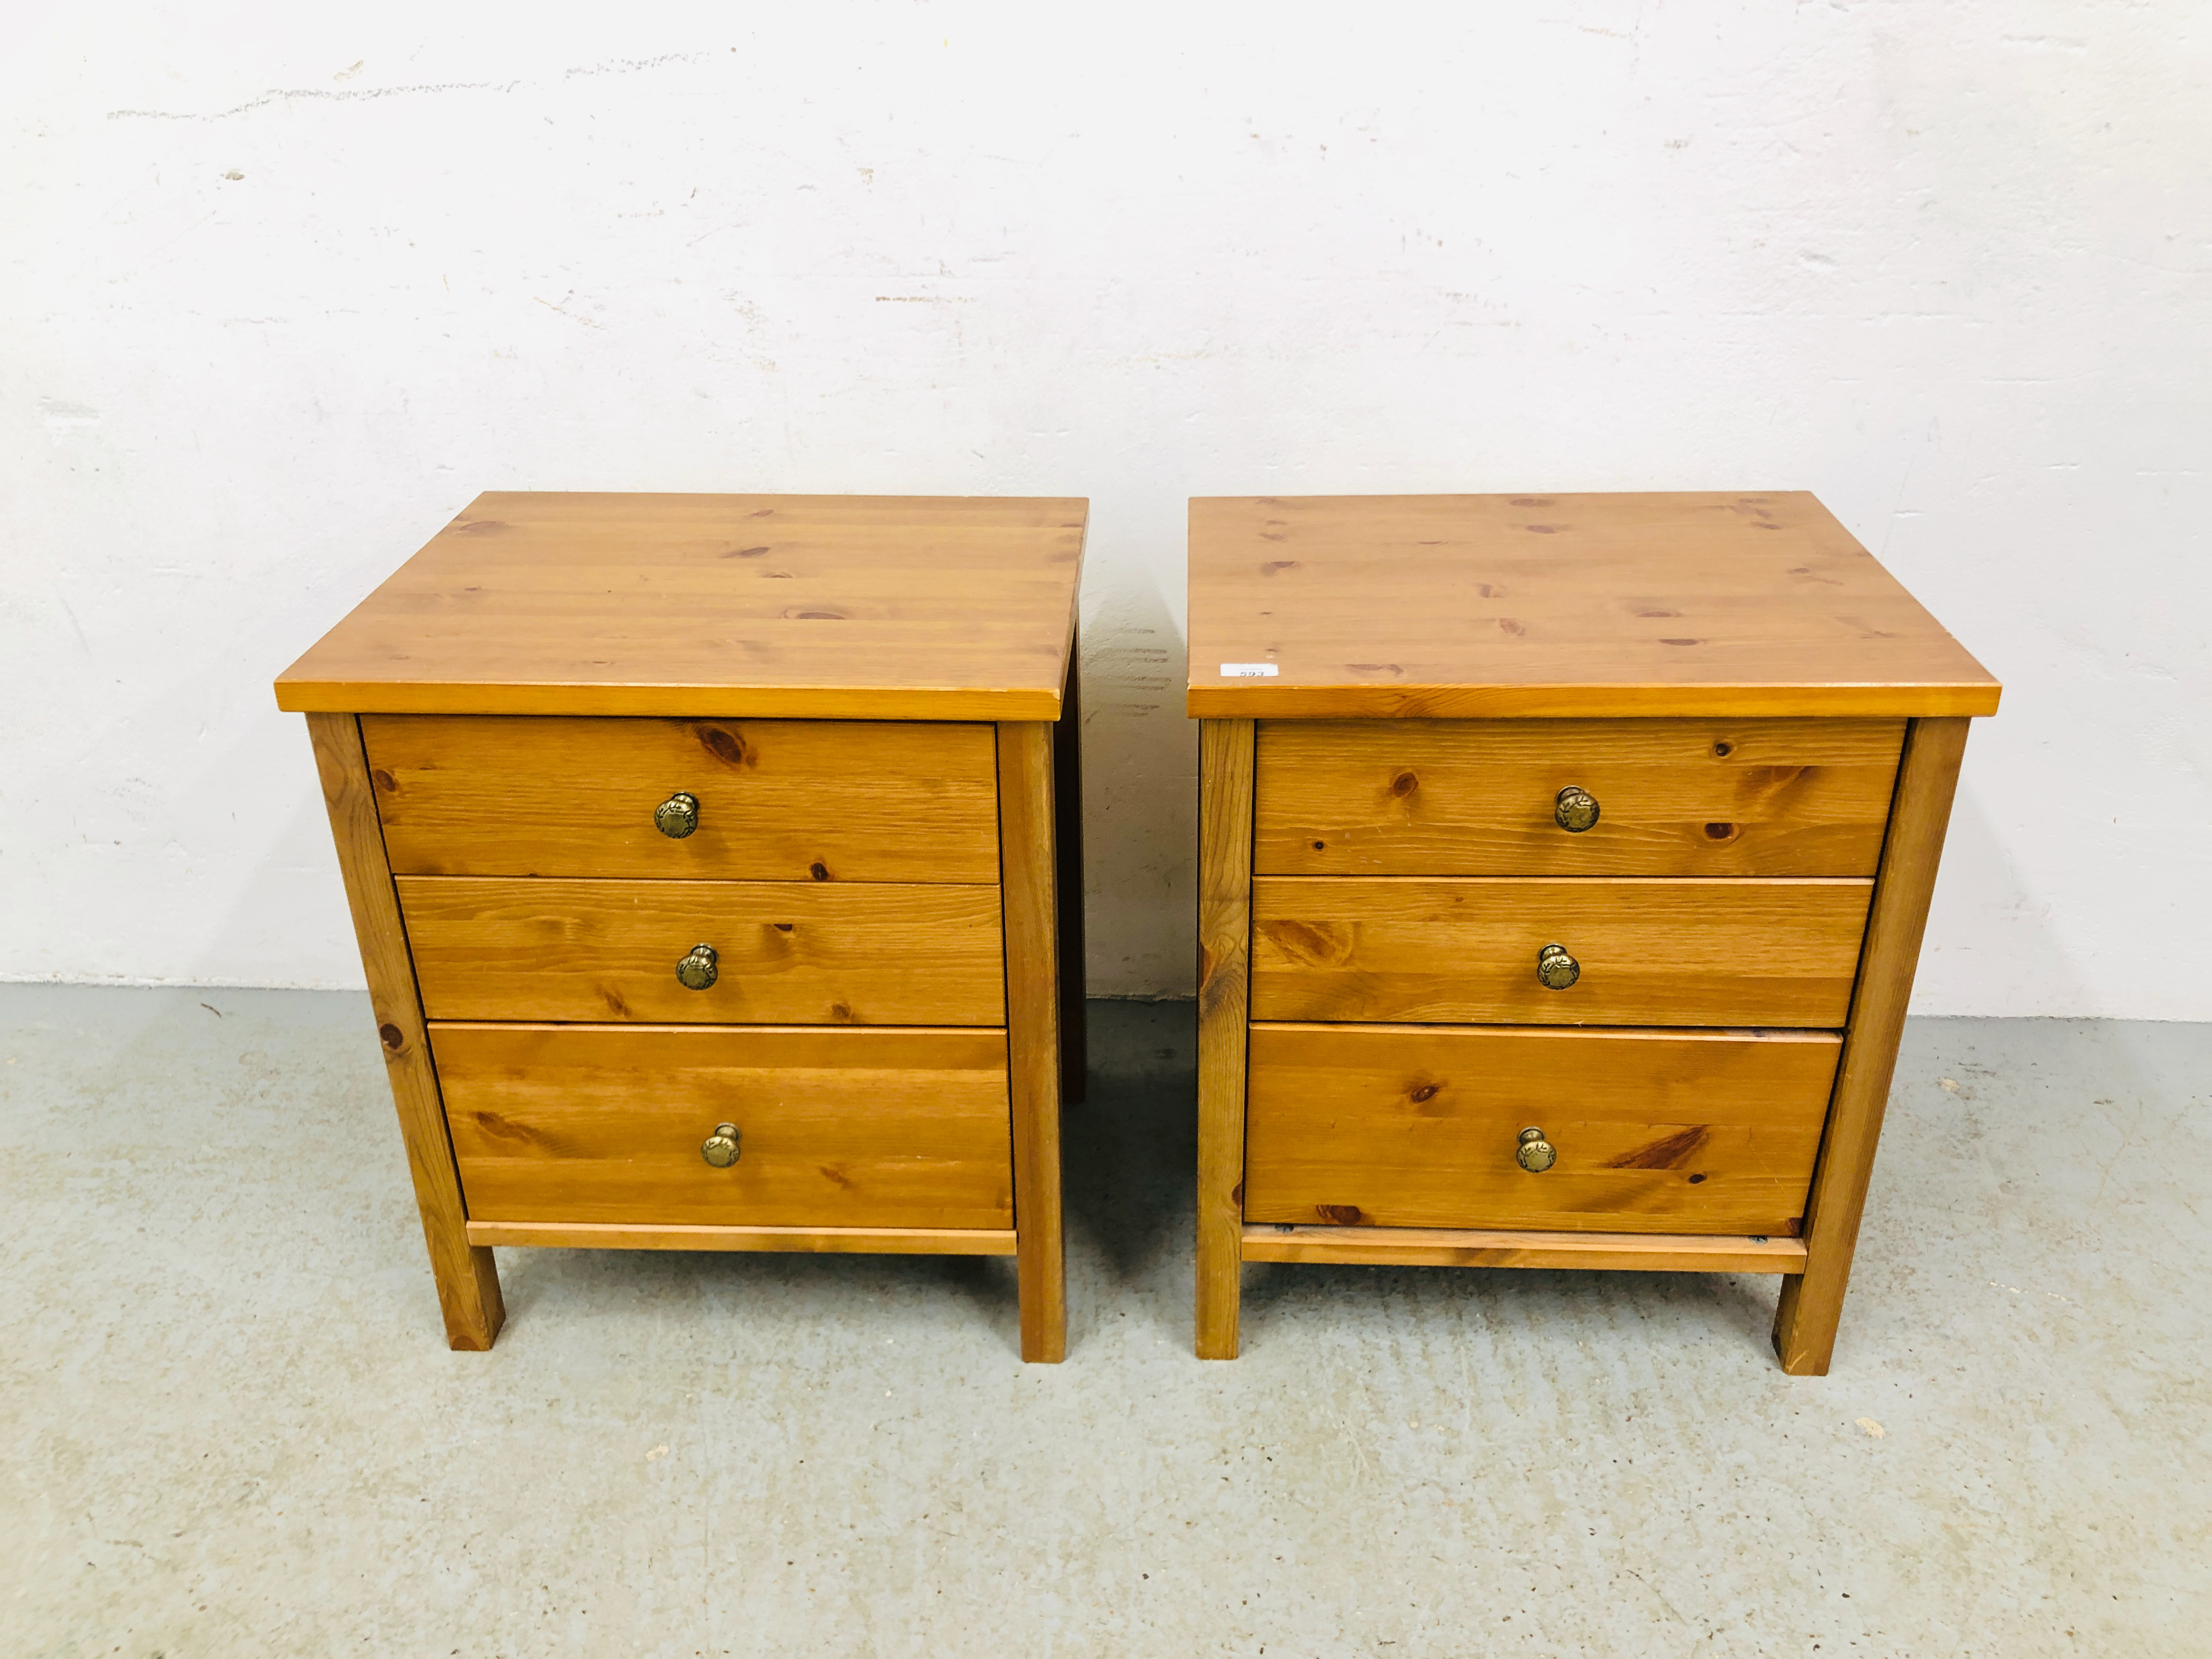 A PAIR OF HONEY PINE THREE DRAWER BEDSIDE CHESTS - W 53CM. D 41CM. H 61CM.